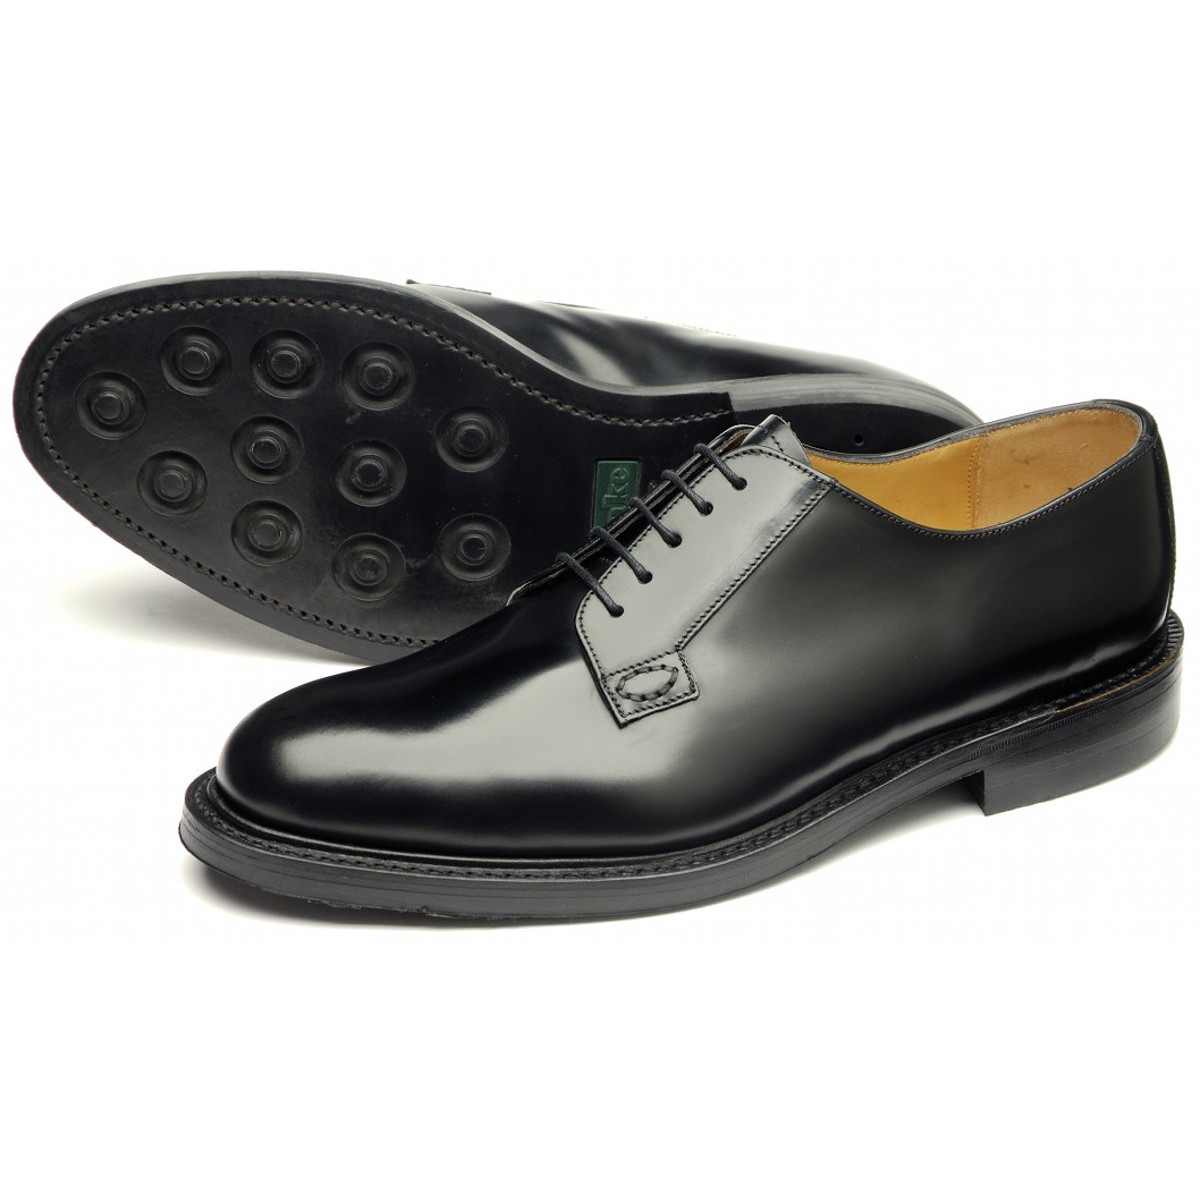 loake shoes rubber sole